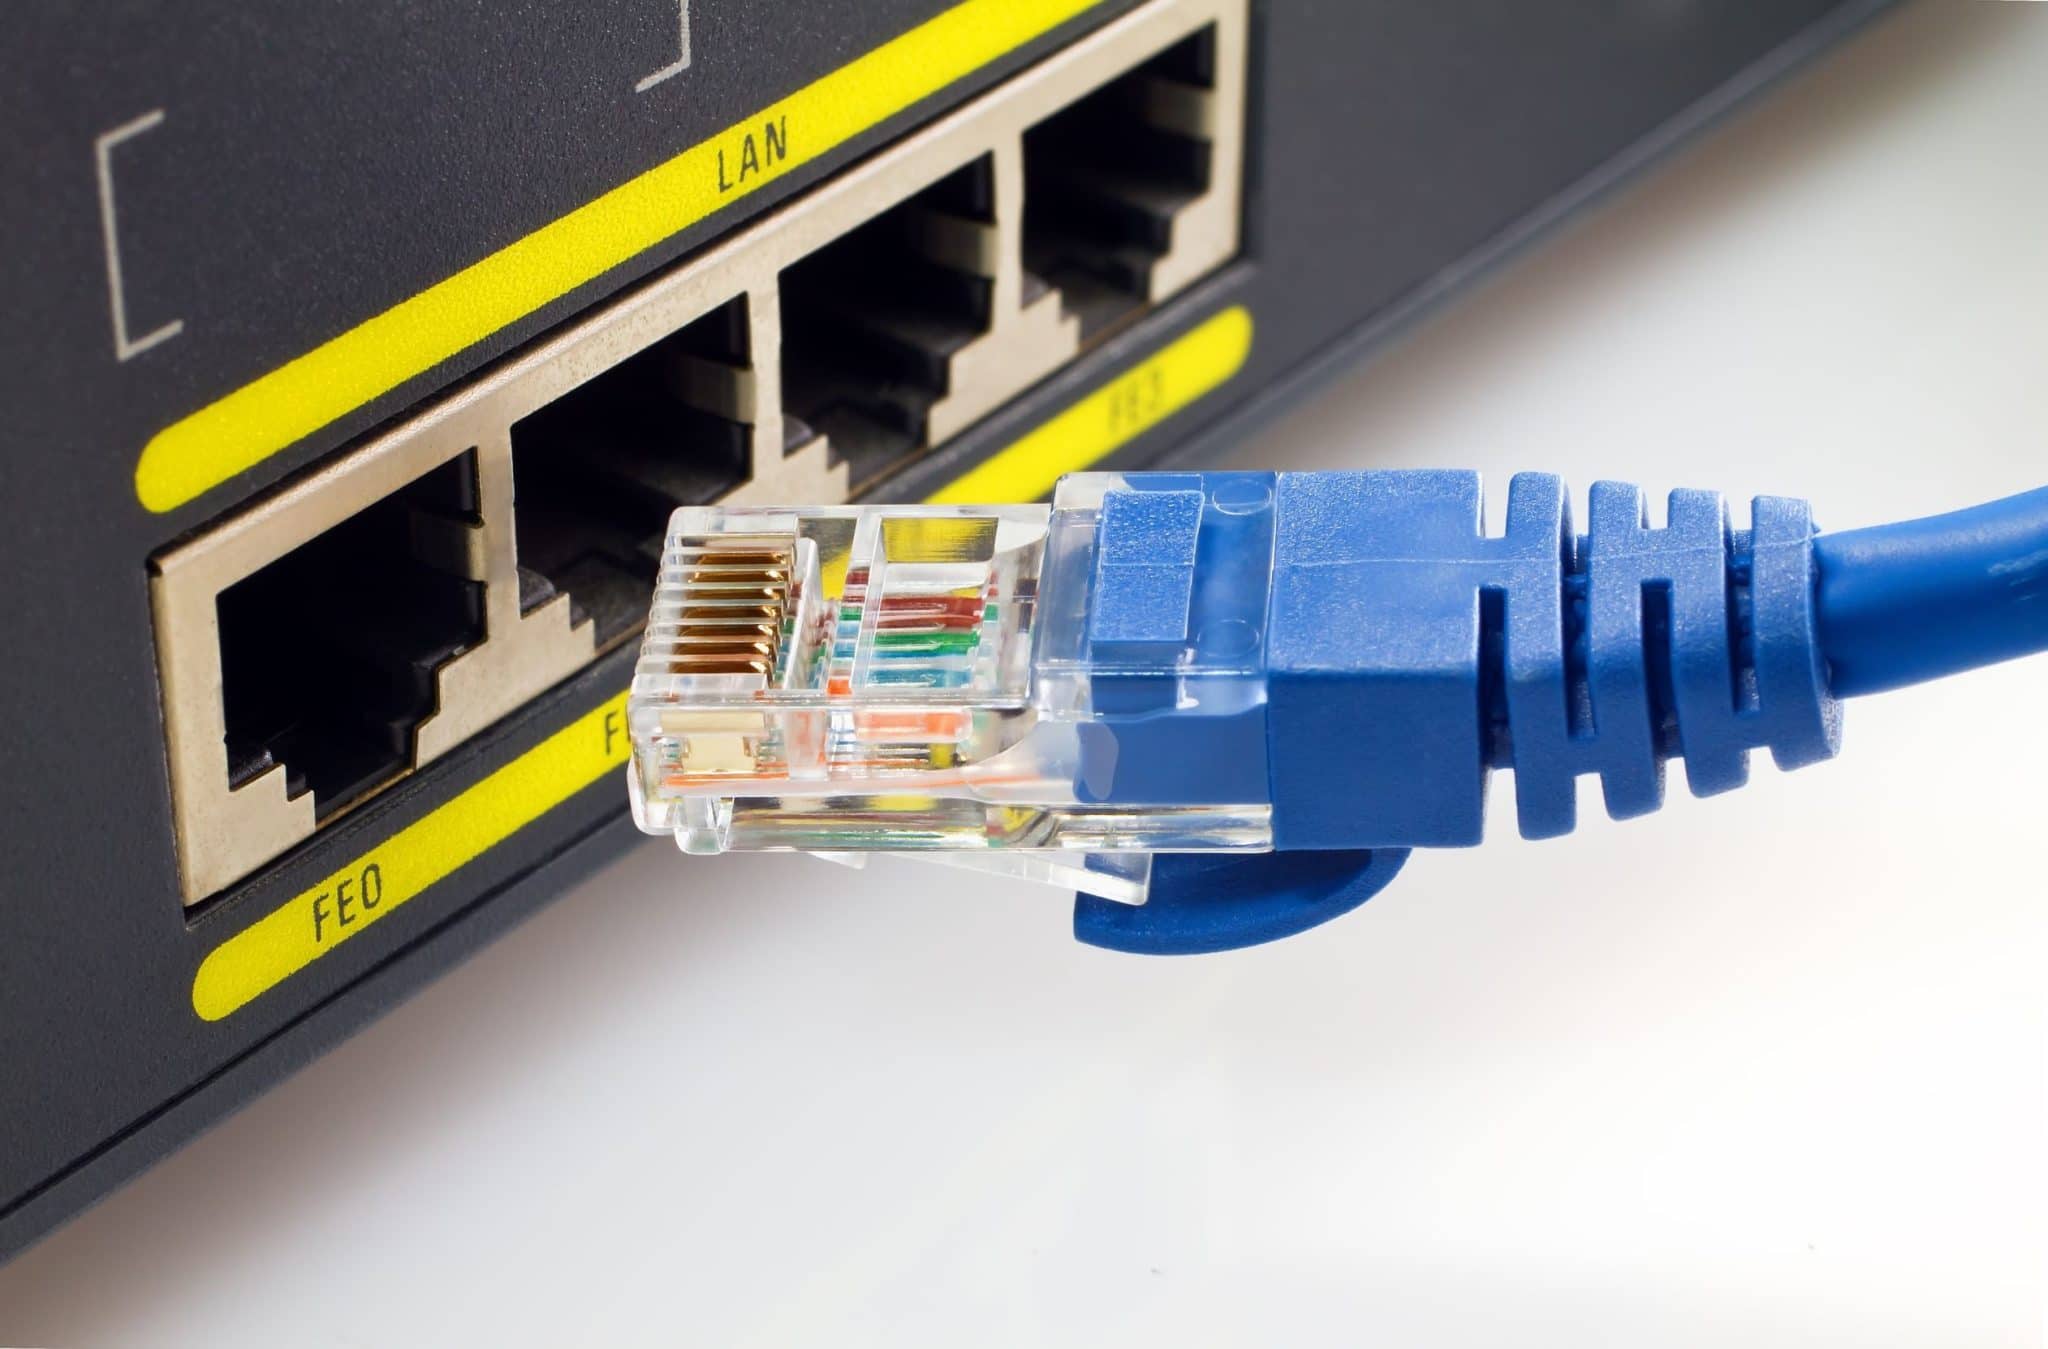 Internet Facts: Ethernet vs Cable